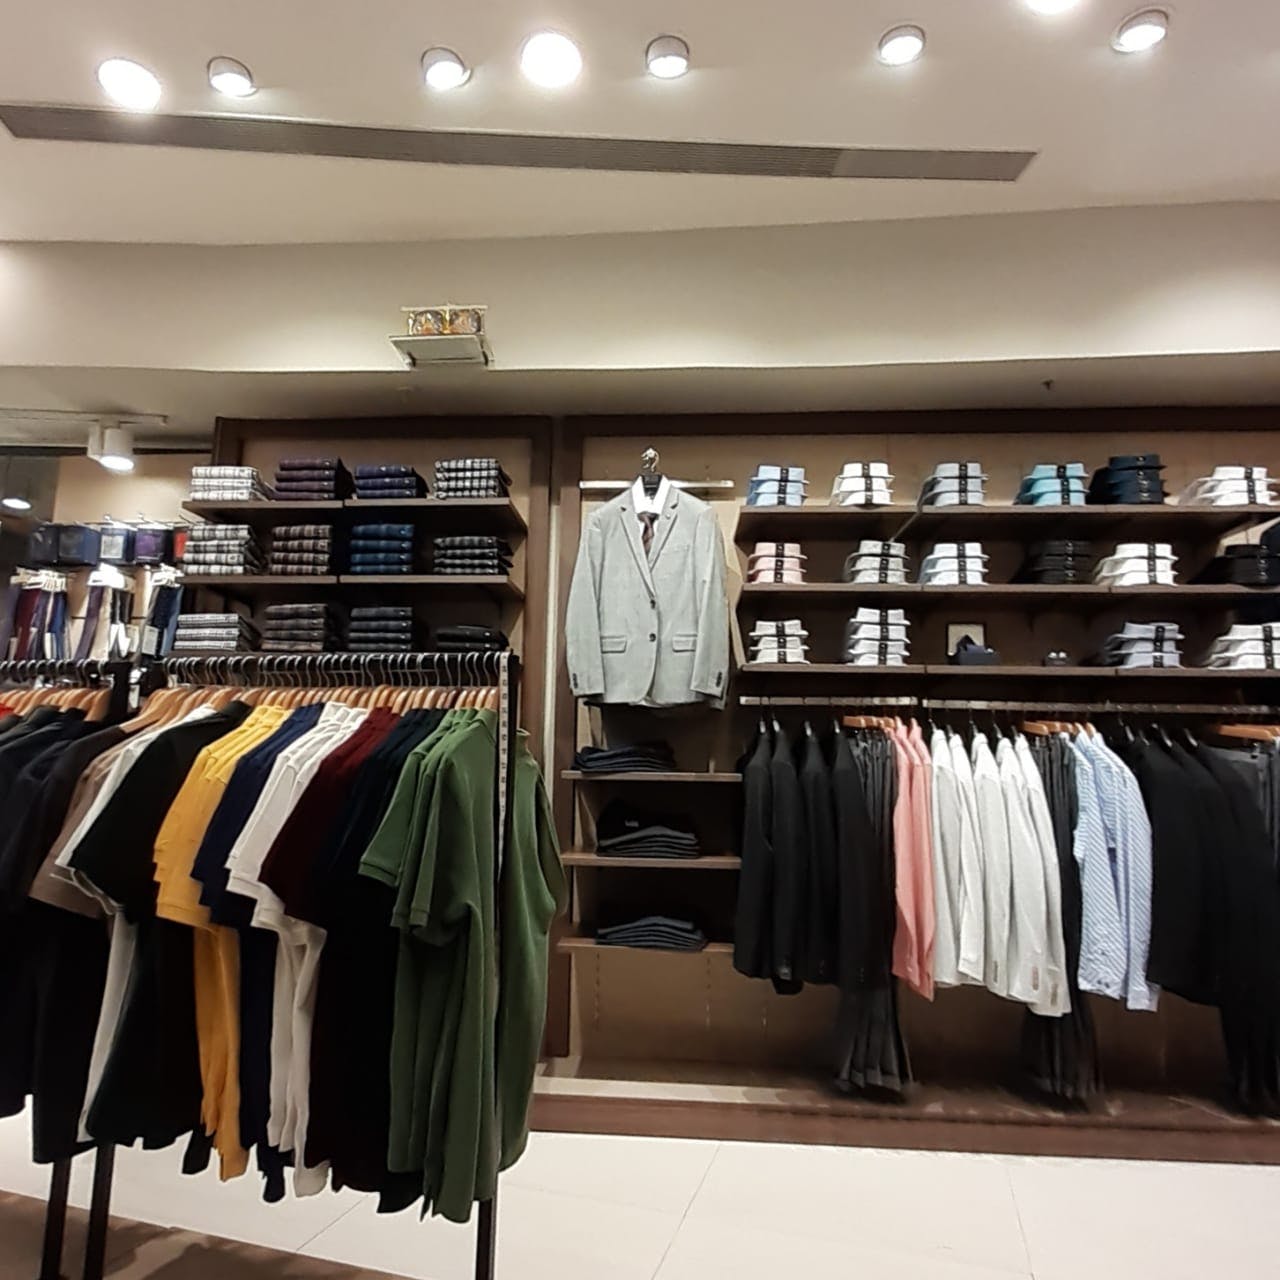 Boutique,Room,Clothing,Closet,Outlet store,Building,Shelf,Retail,Furniture,Wardrobe